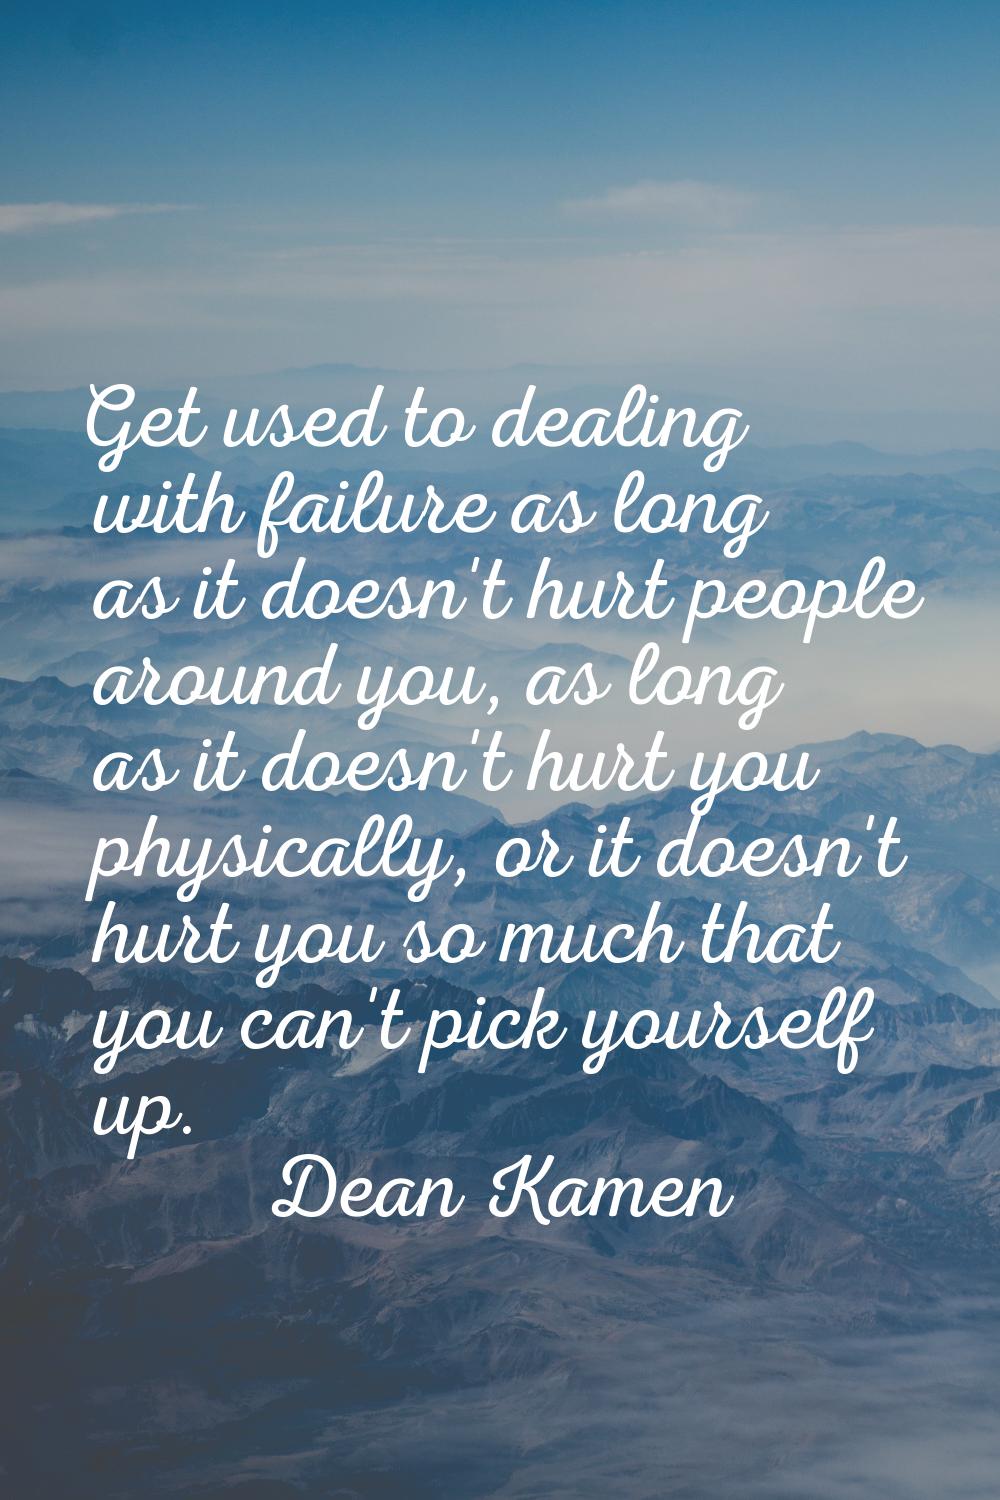 Get used to dealing with failure as long as it doesn't hurt people around you, as long as it doesn'